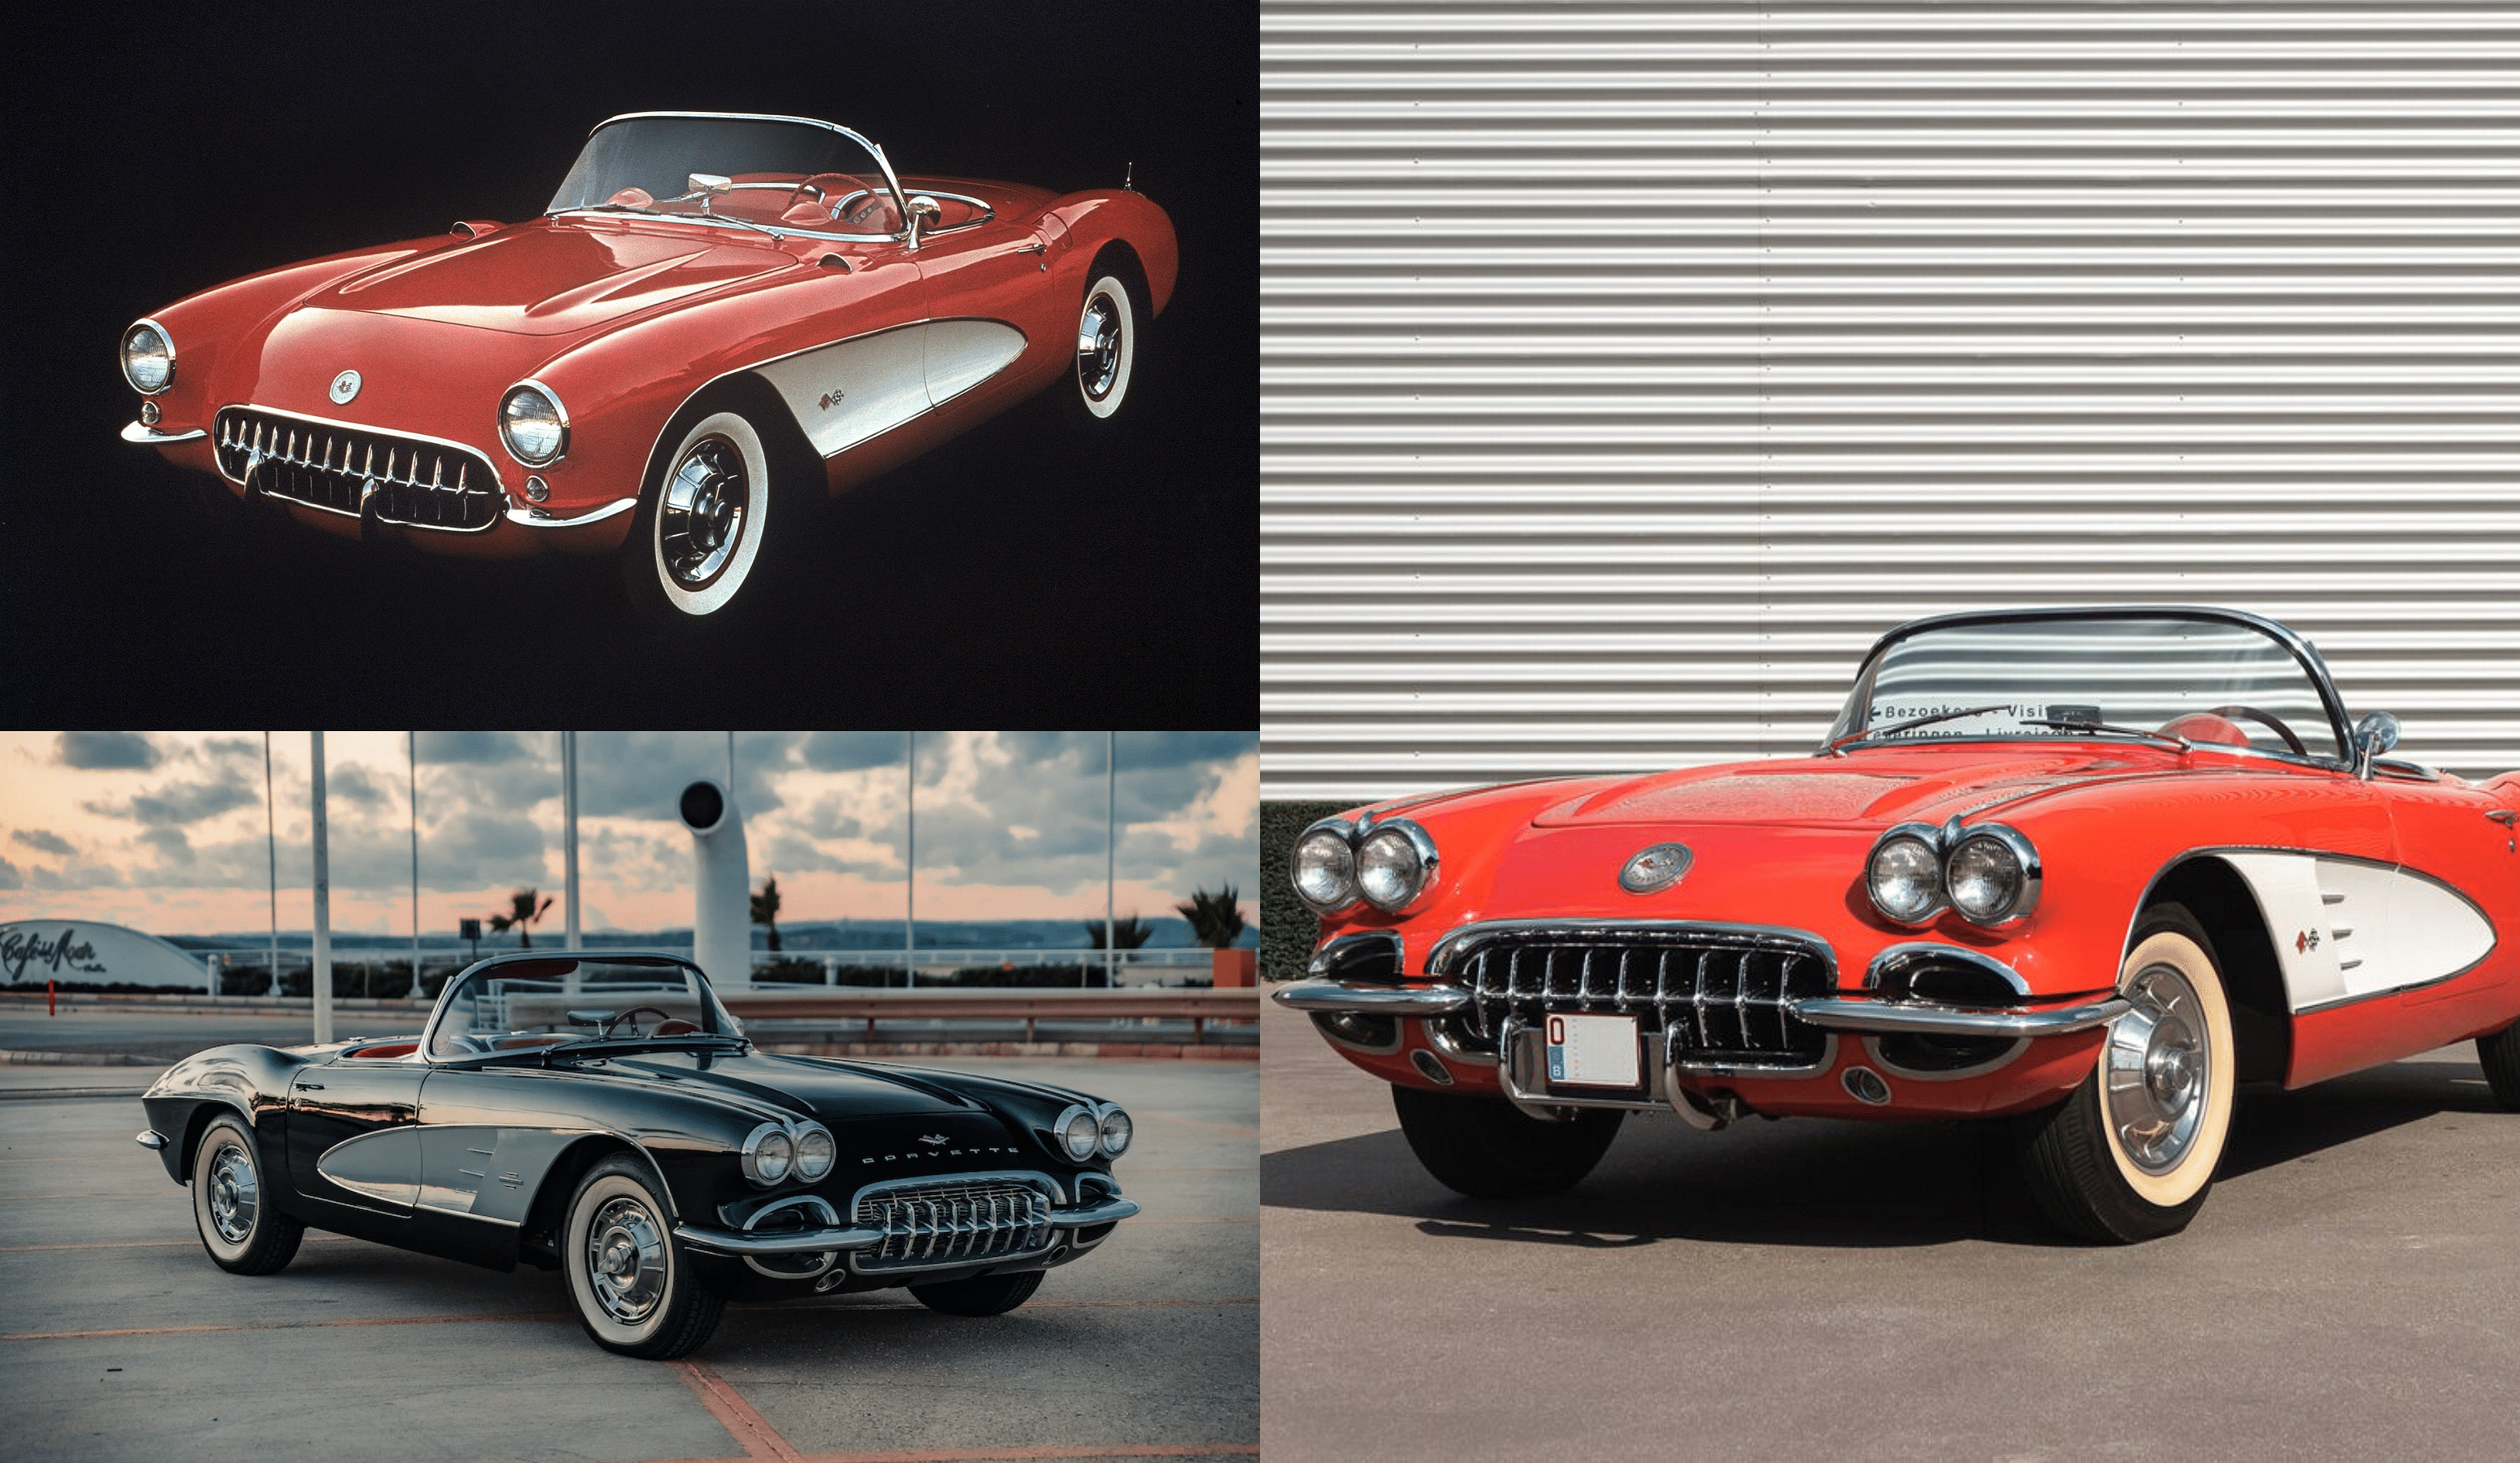 The 1956 Chevrolet Corvette C1 in Red and Black color, front and side view